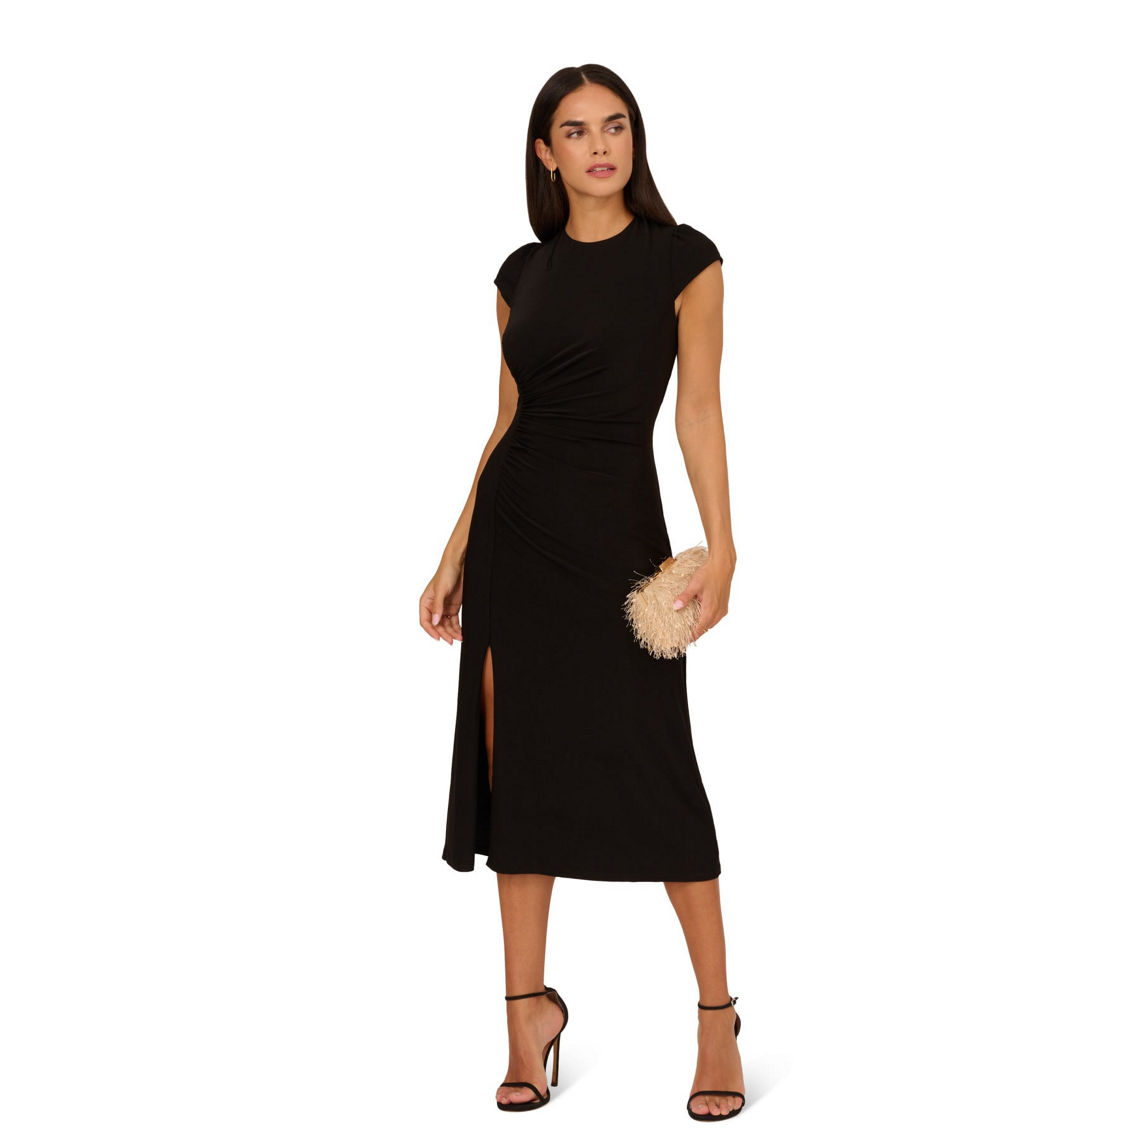 Adrianna Papell Jersey Midi Dress Cap Sleeves - Image 3 of 5